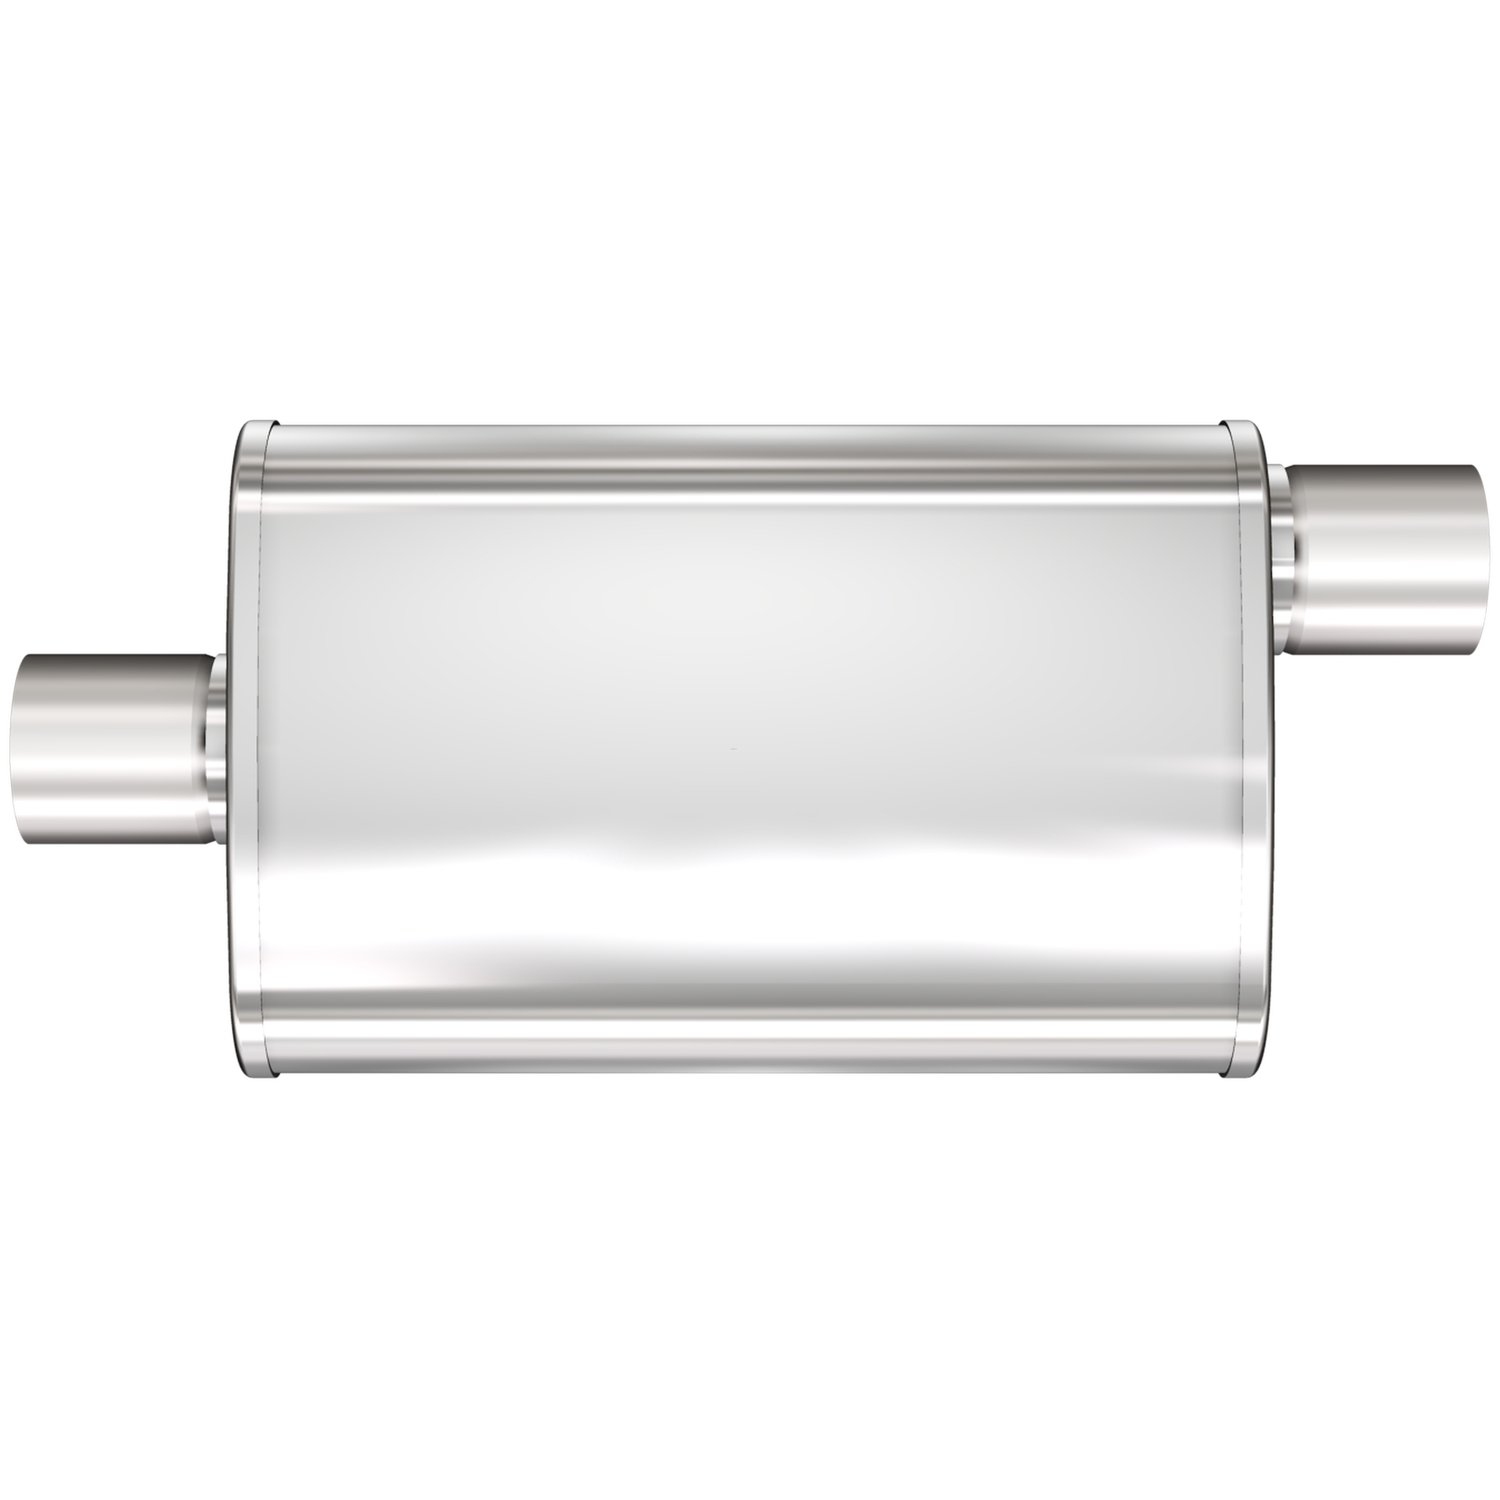 4" x 9" Oval XL 3-Chamber Muffler Center In/Offset Out: 3"/3" Body Length: 18" Overall Length: 24" Satin Finish